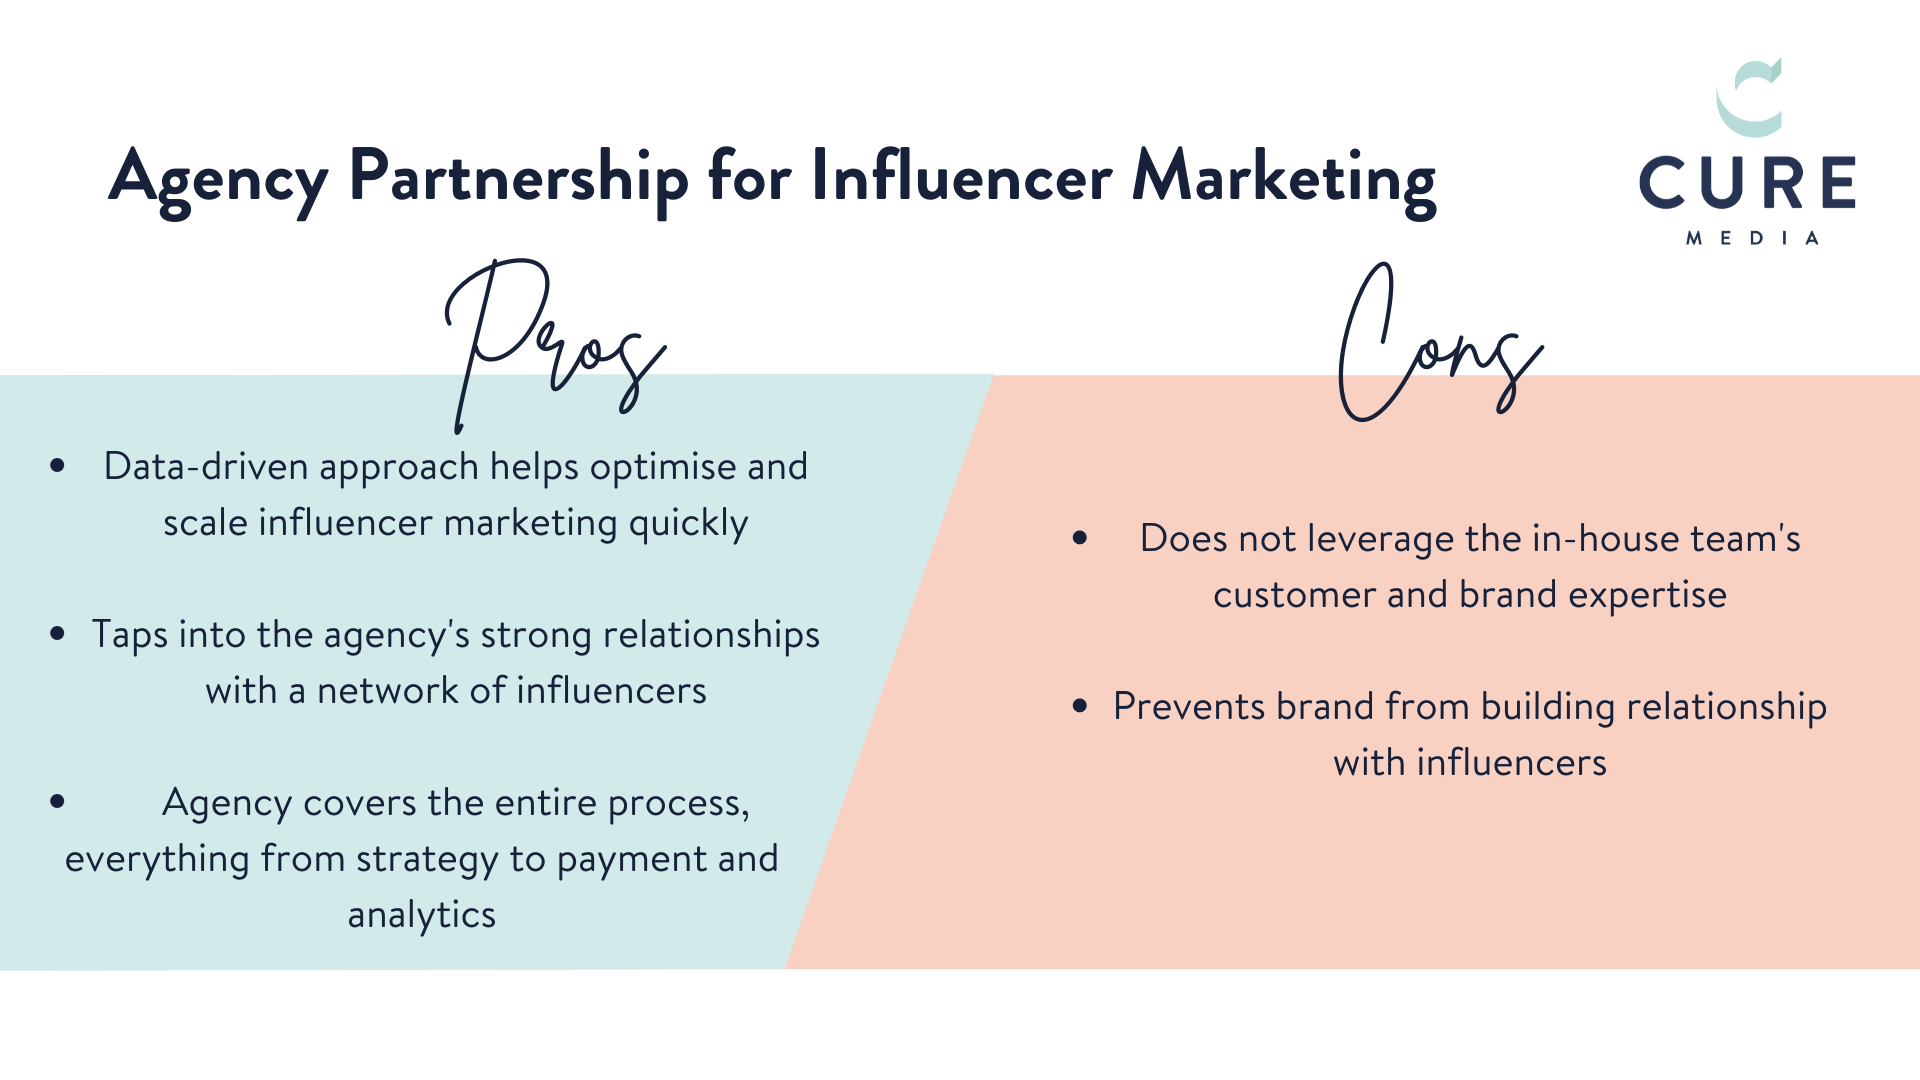 Pros and cons of using an influencer marketing agency